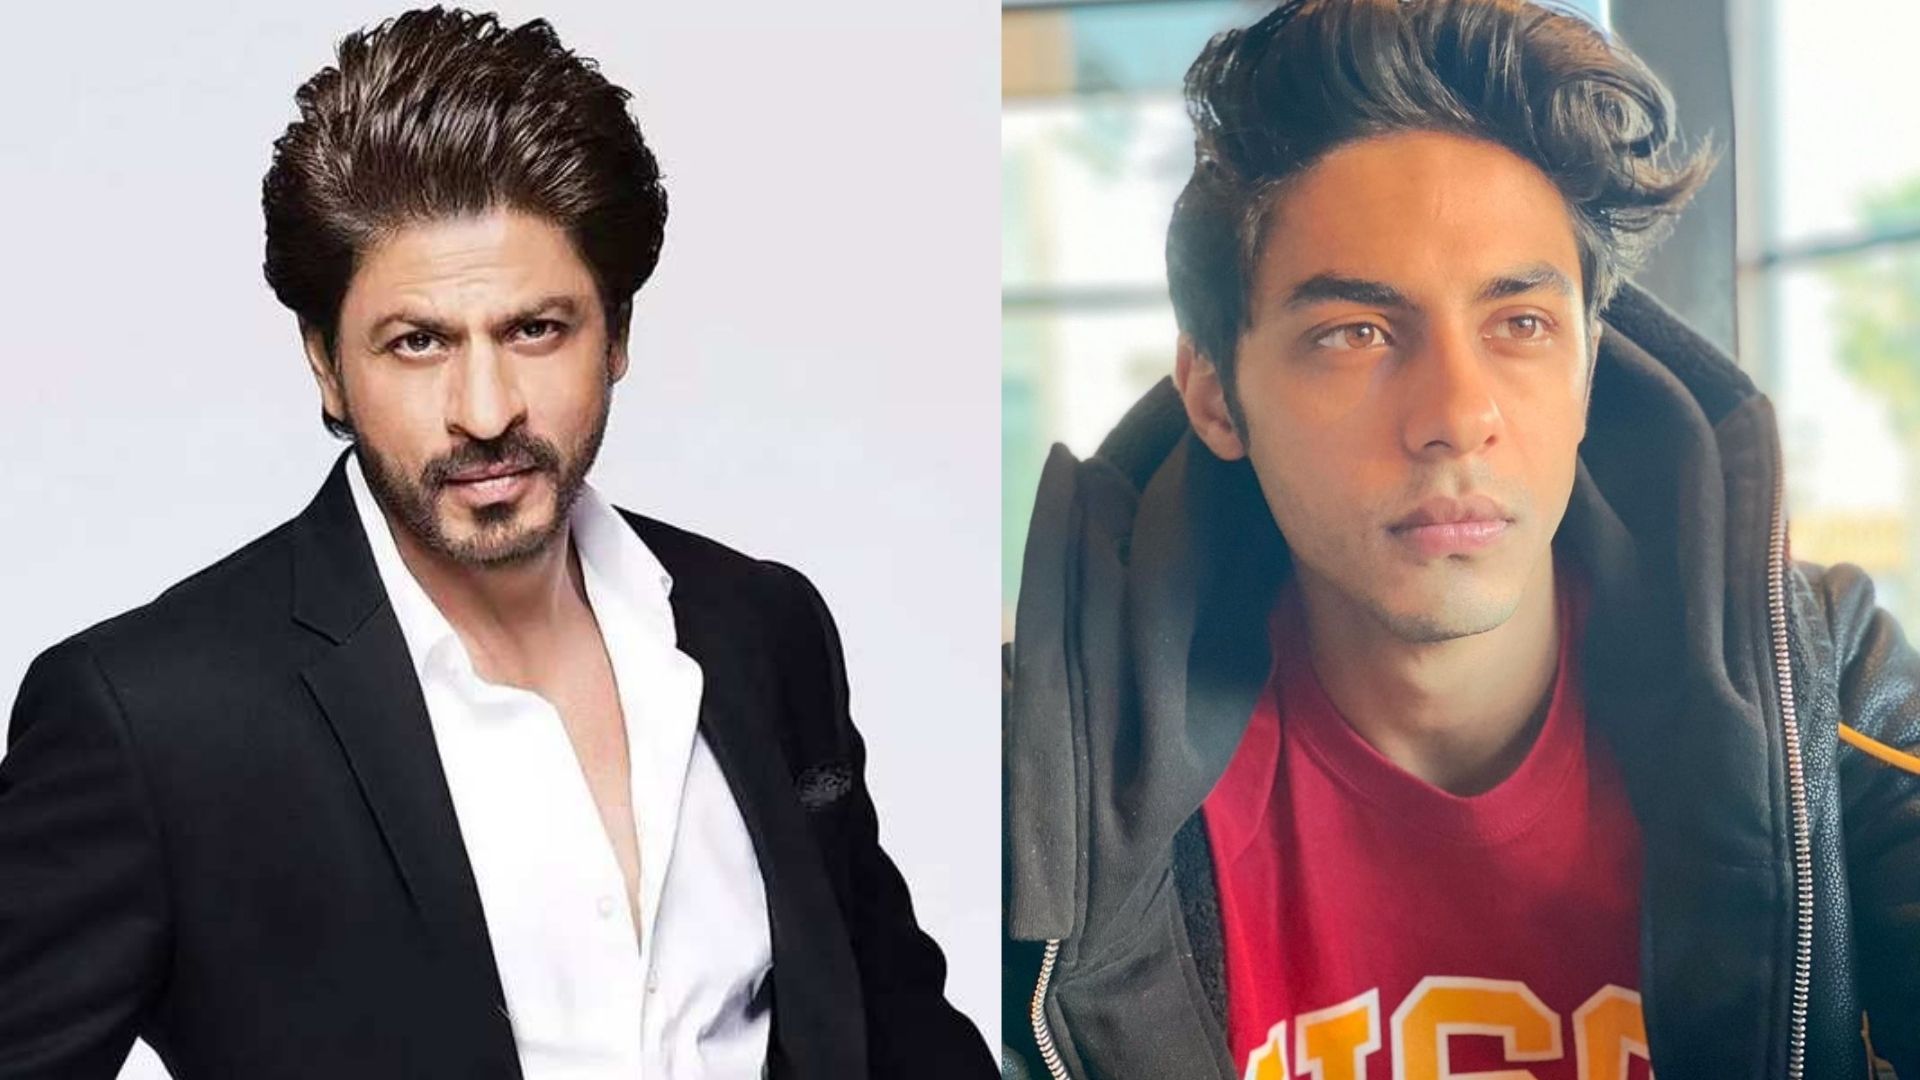 Aryan Khan Sounds like his Father Shah Rukh Khan, Is the Young Star Following His Father's Footsteps?